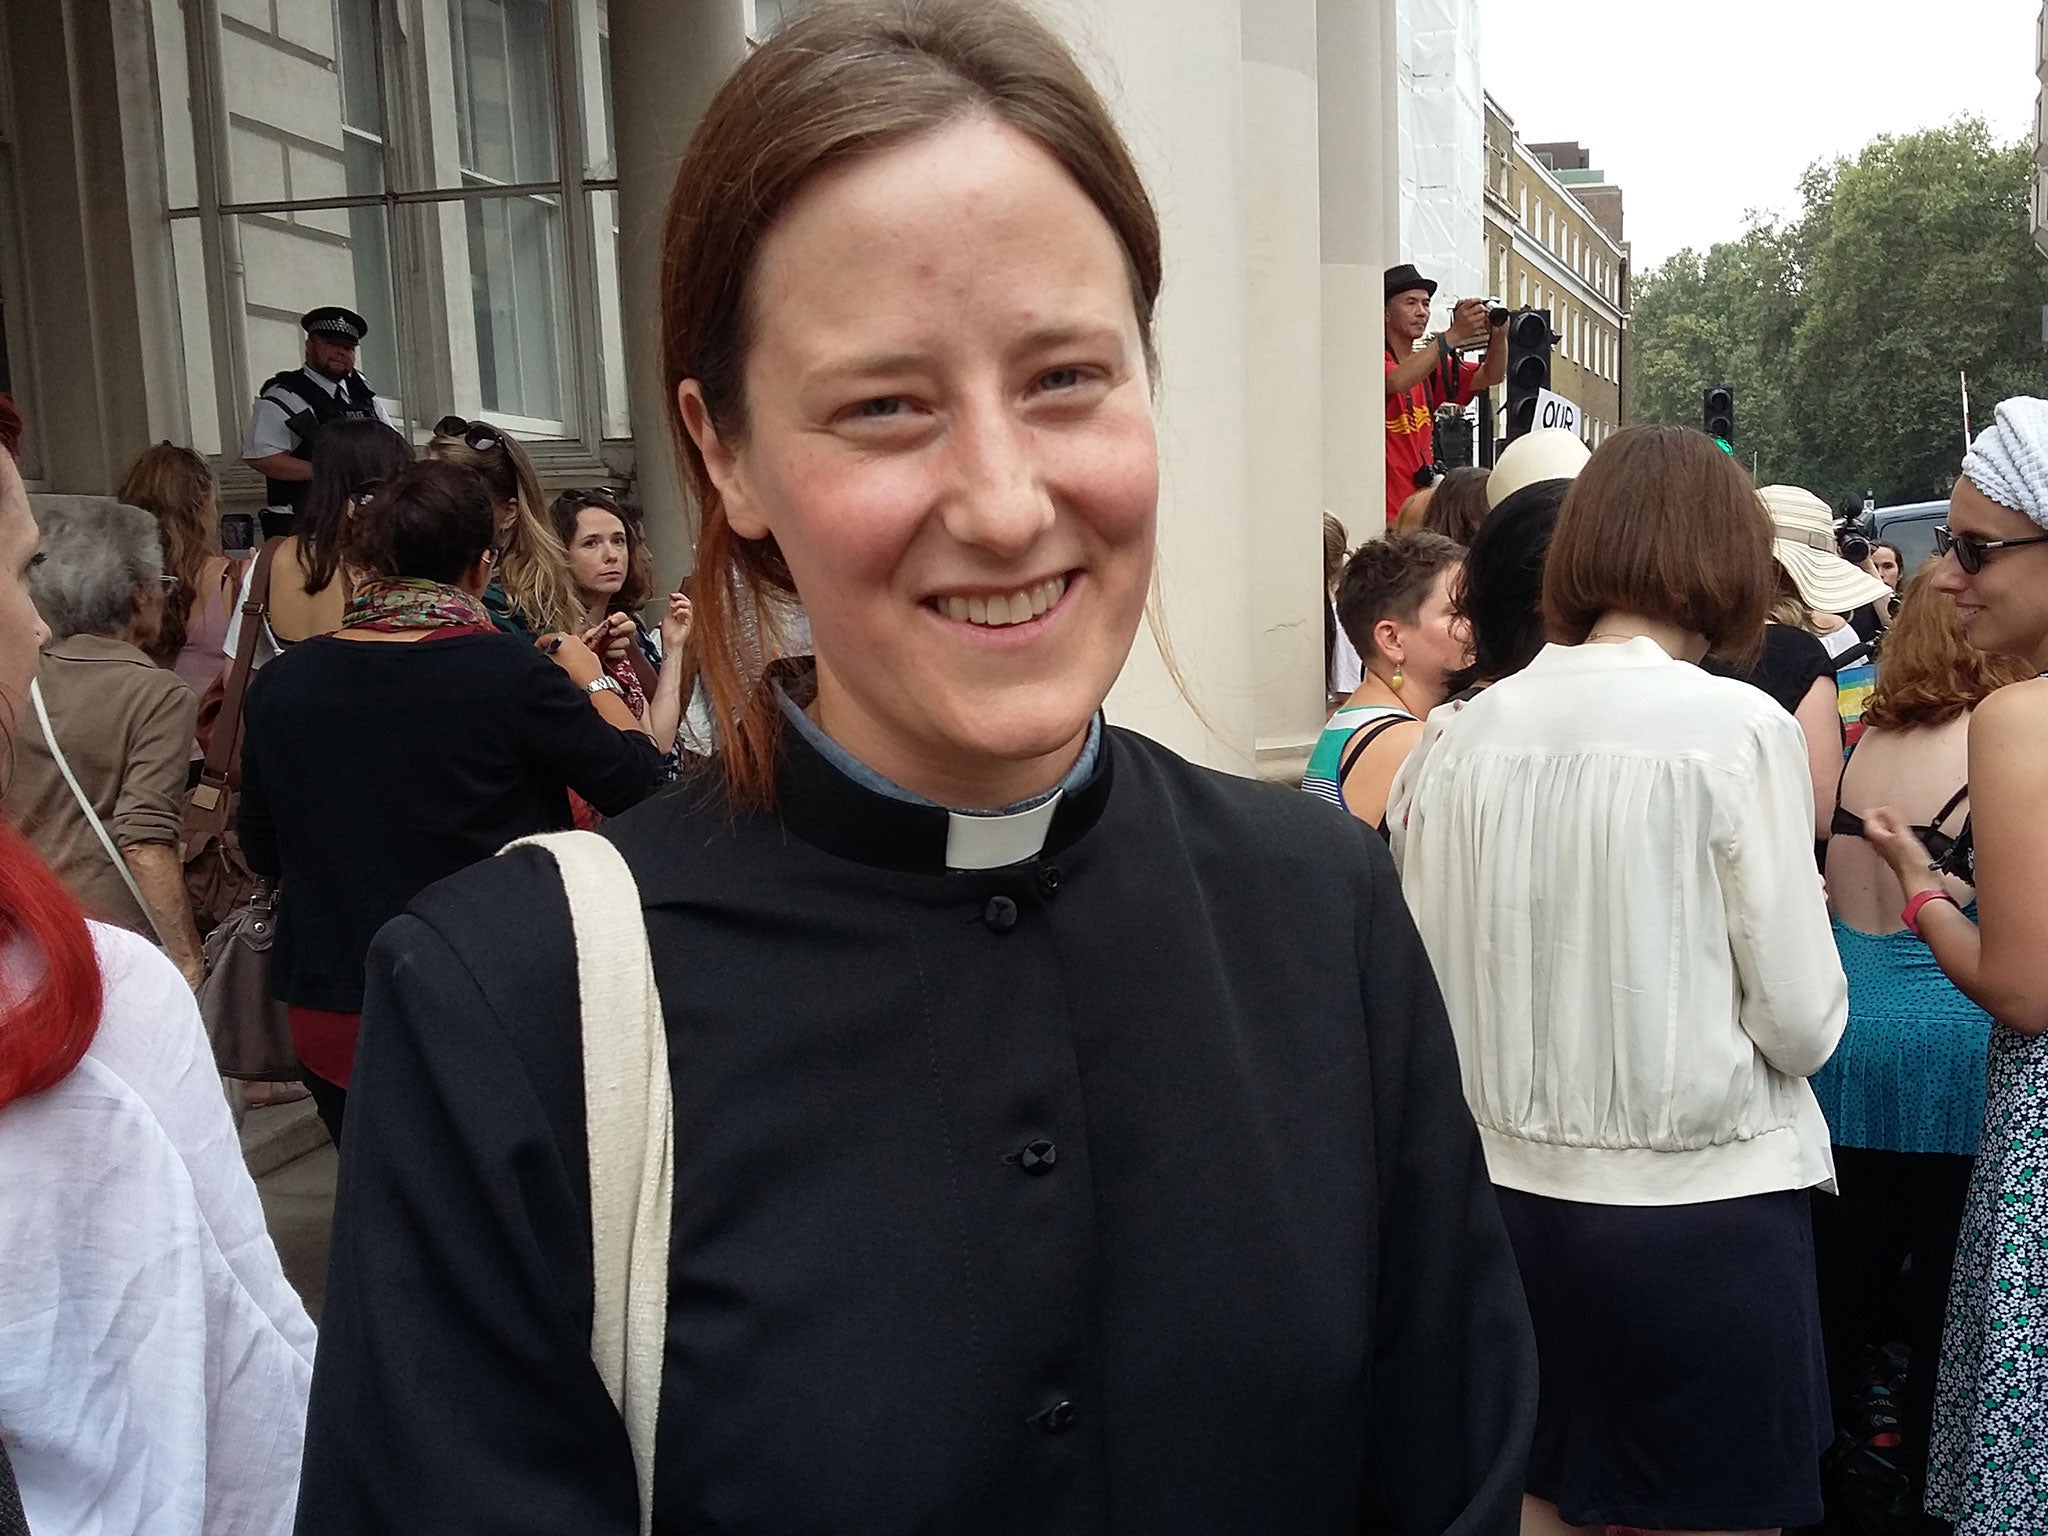 Jenny Dawkins, a curate from All Saints Church in Peckham joined in at an anti-burkini ban protest